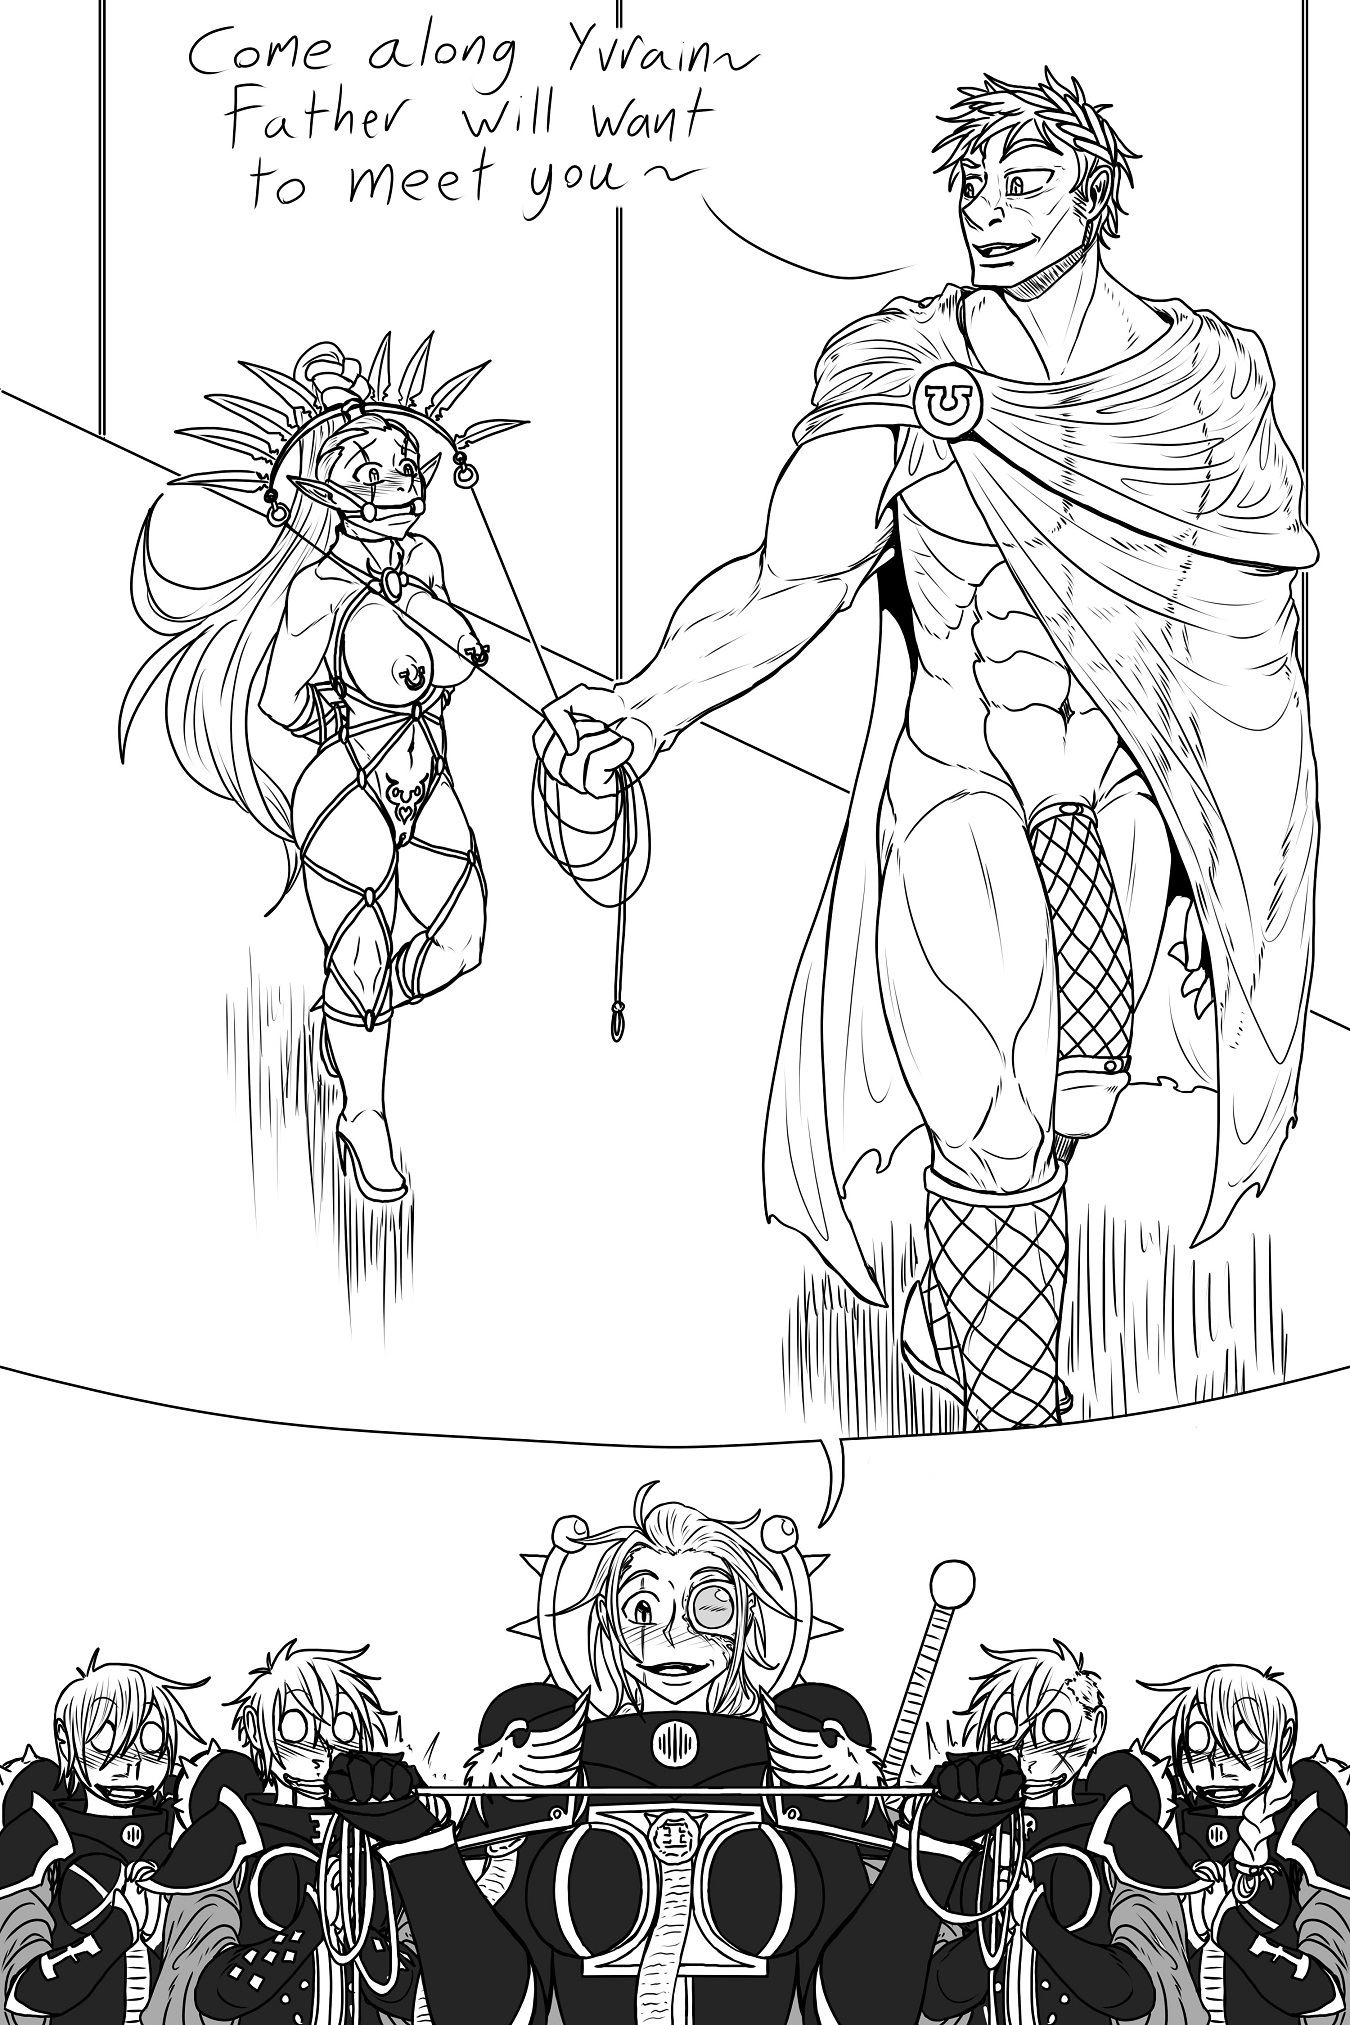 How loyalists see the relationship between Yvraine and Guilliman - NSFW, Warhammer 40k, Yvraine, Roboute guilliman, Art